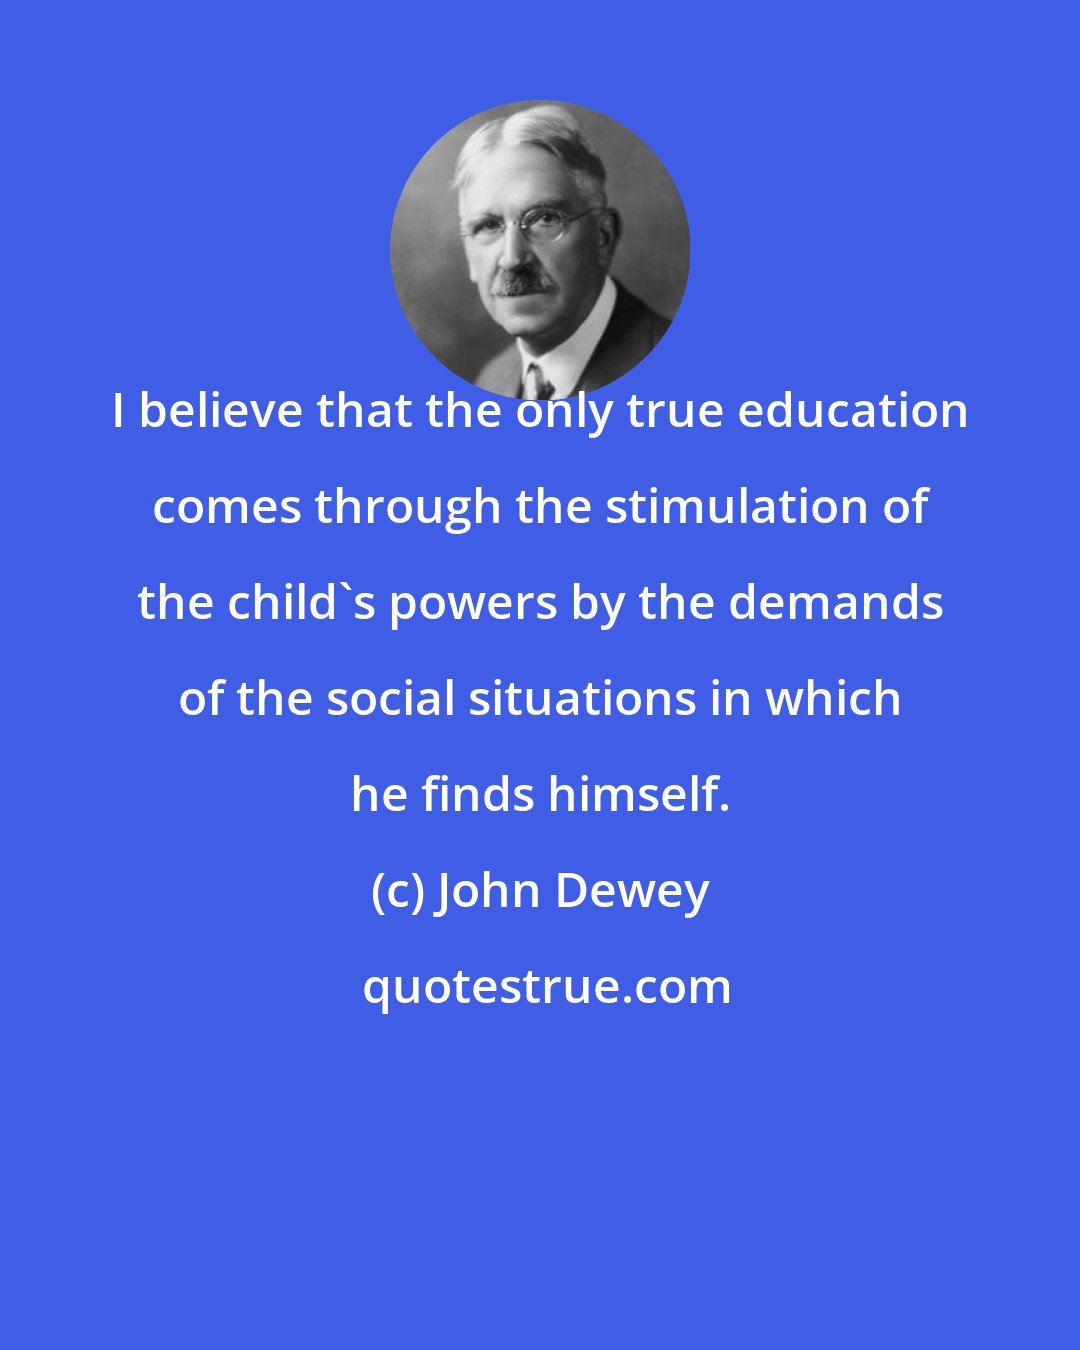 John Dewey: I believe that the only true education comes through the stimulation of the child's powers by the demands of the social situations in which he finds himself.